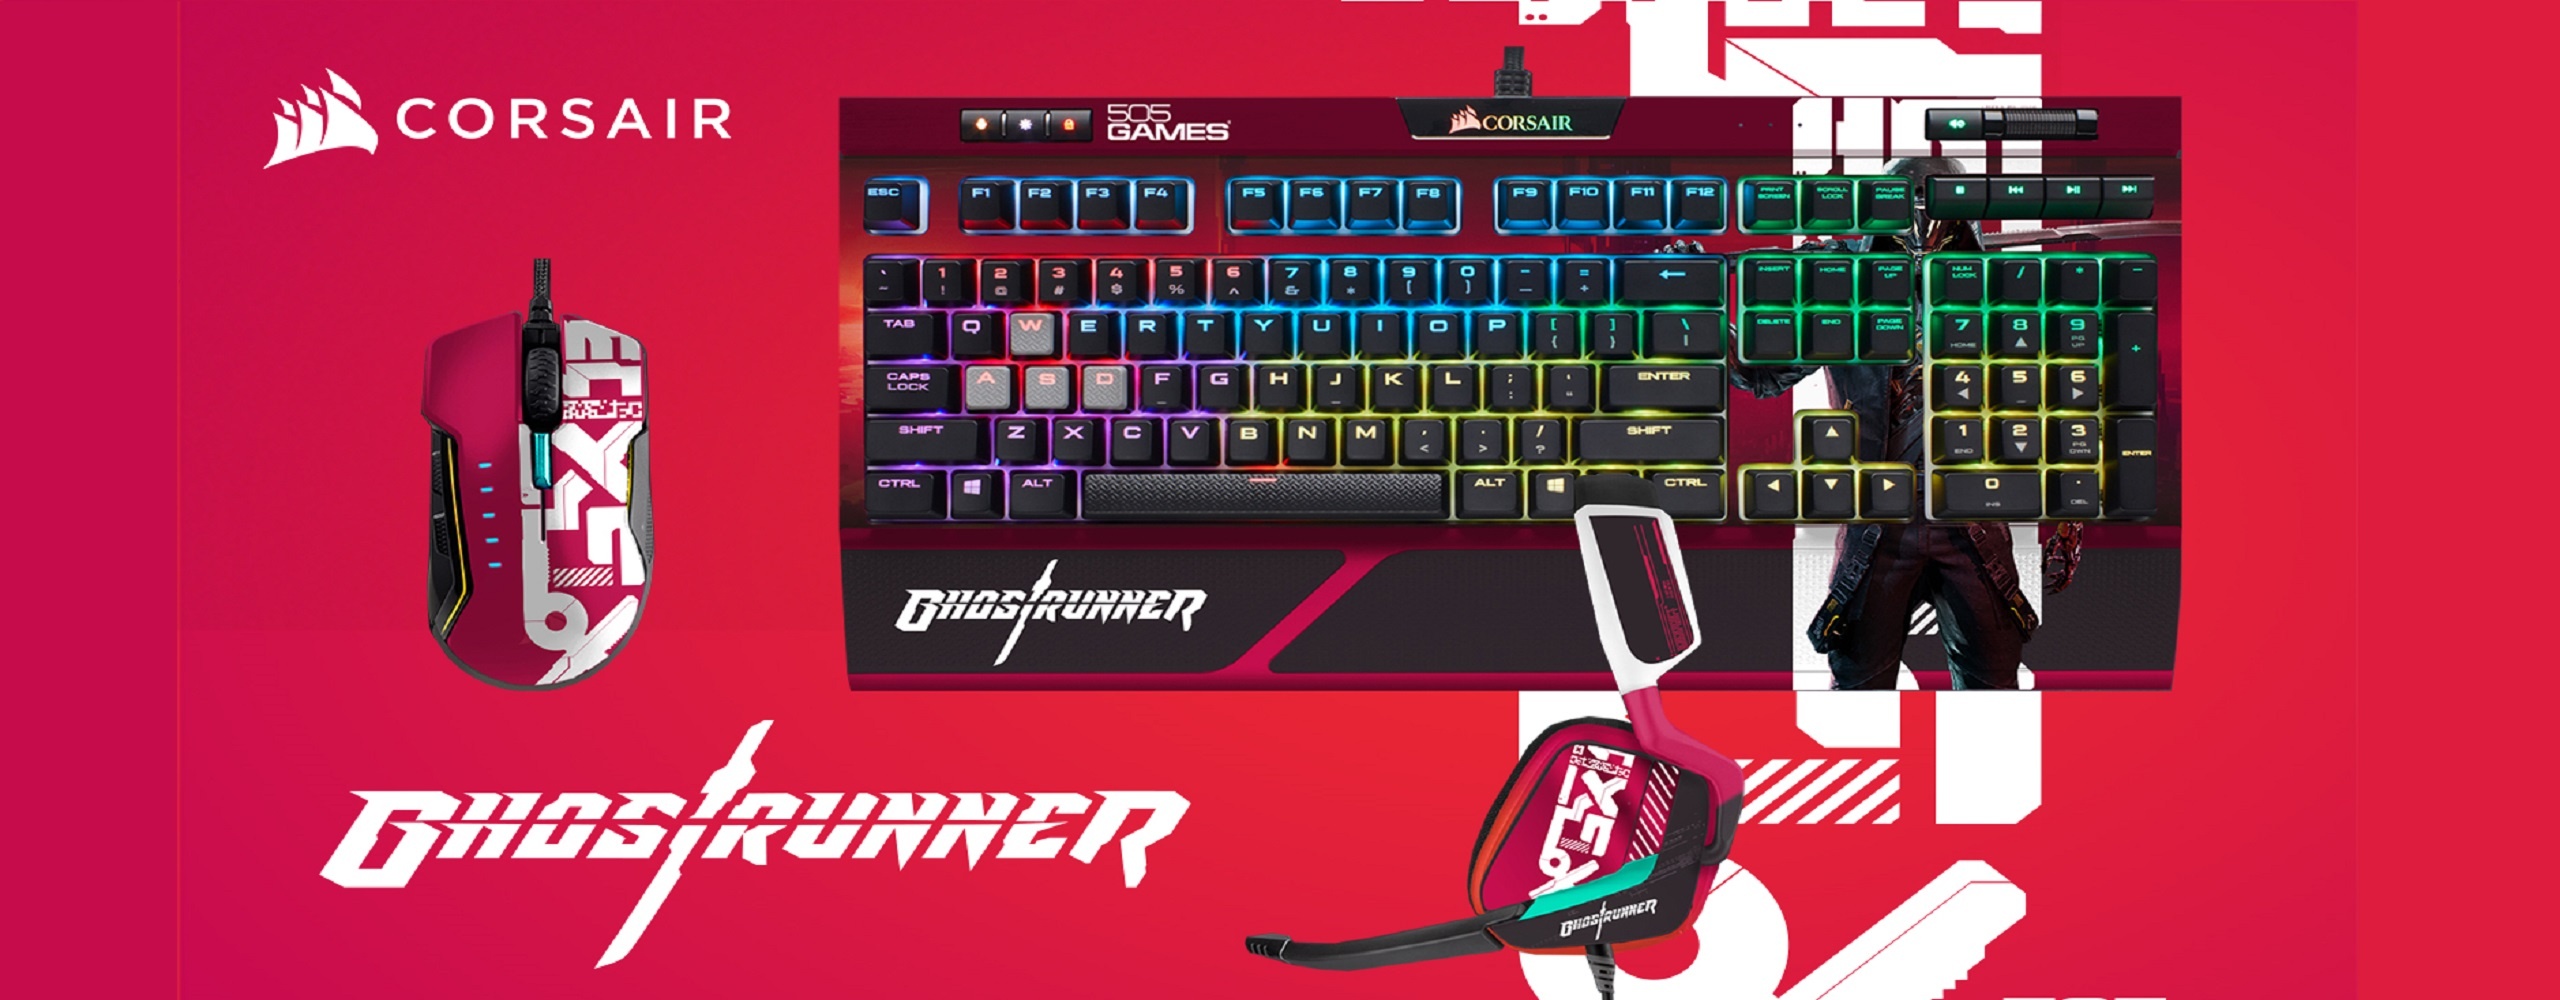 CORSAIR x Ghostrunner Featuring iCue Lighting and Legendary Prize Giveaway